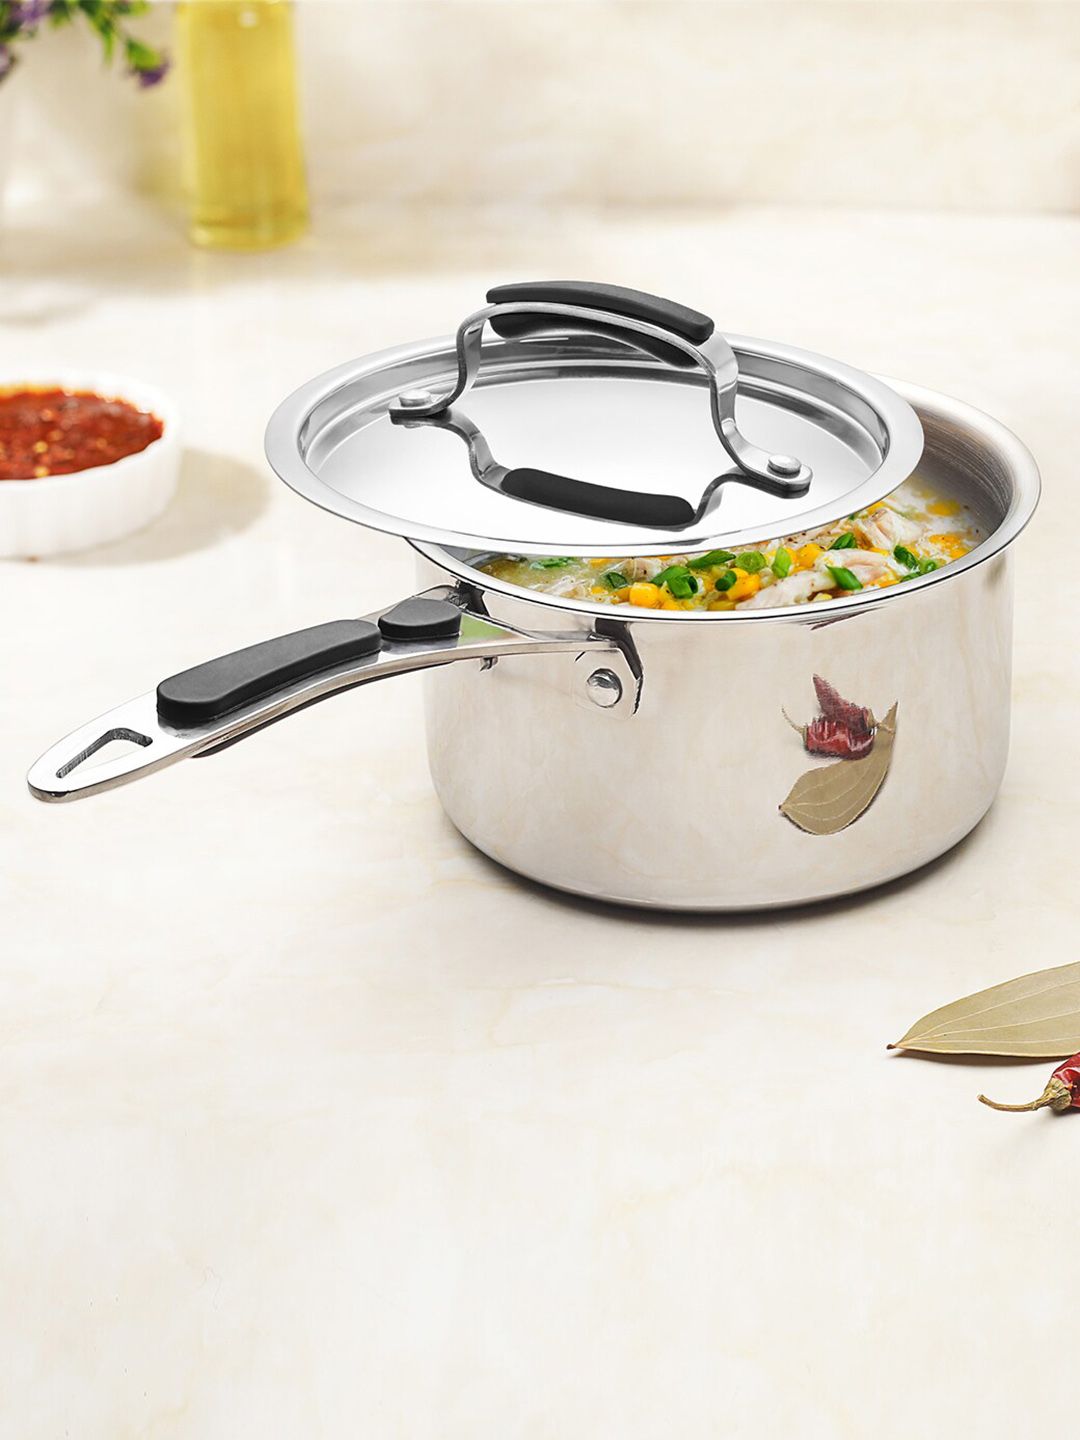 INOXBARON Silver-Toned Solid Stainless Steel Saucepan With Lid Price in India